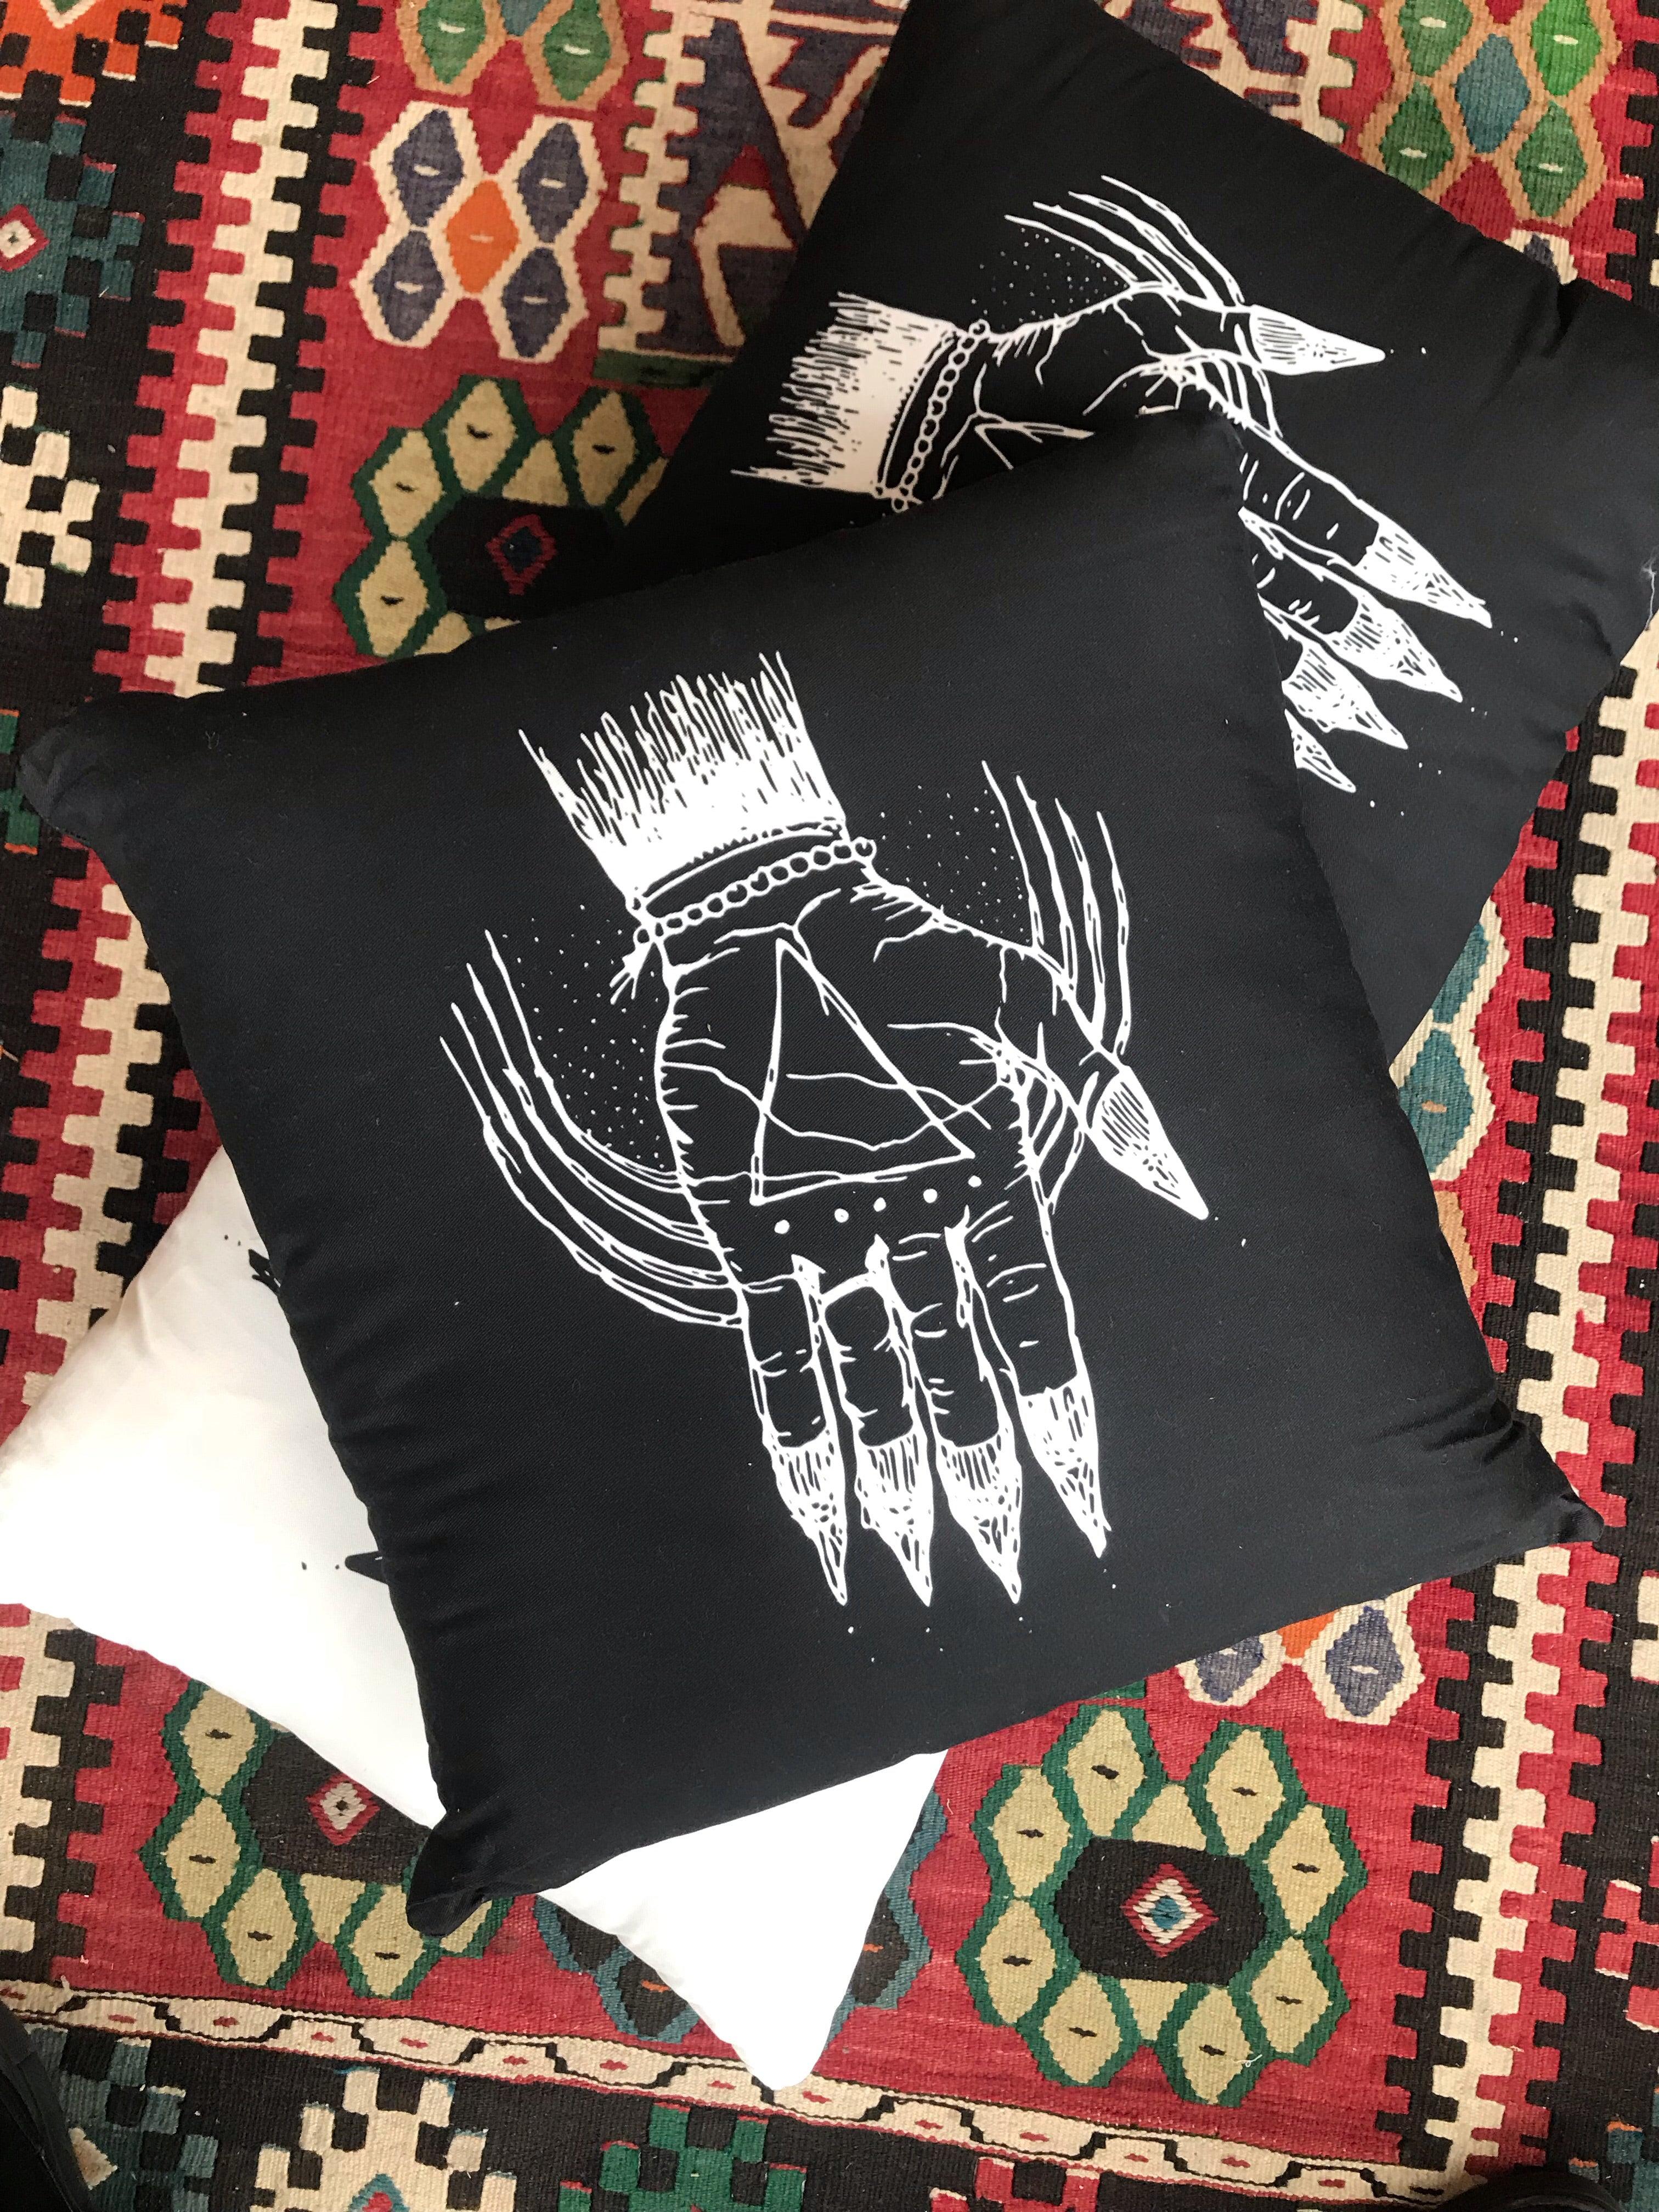 Hand of the Occult - Throw Pillow Cover (Cotton) 20” x 20” - Keven Craft Rituals